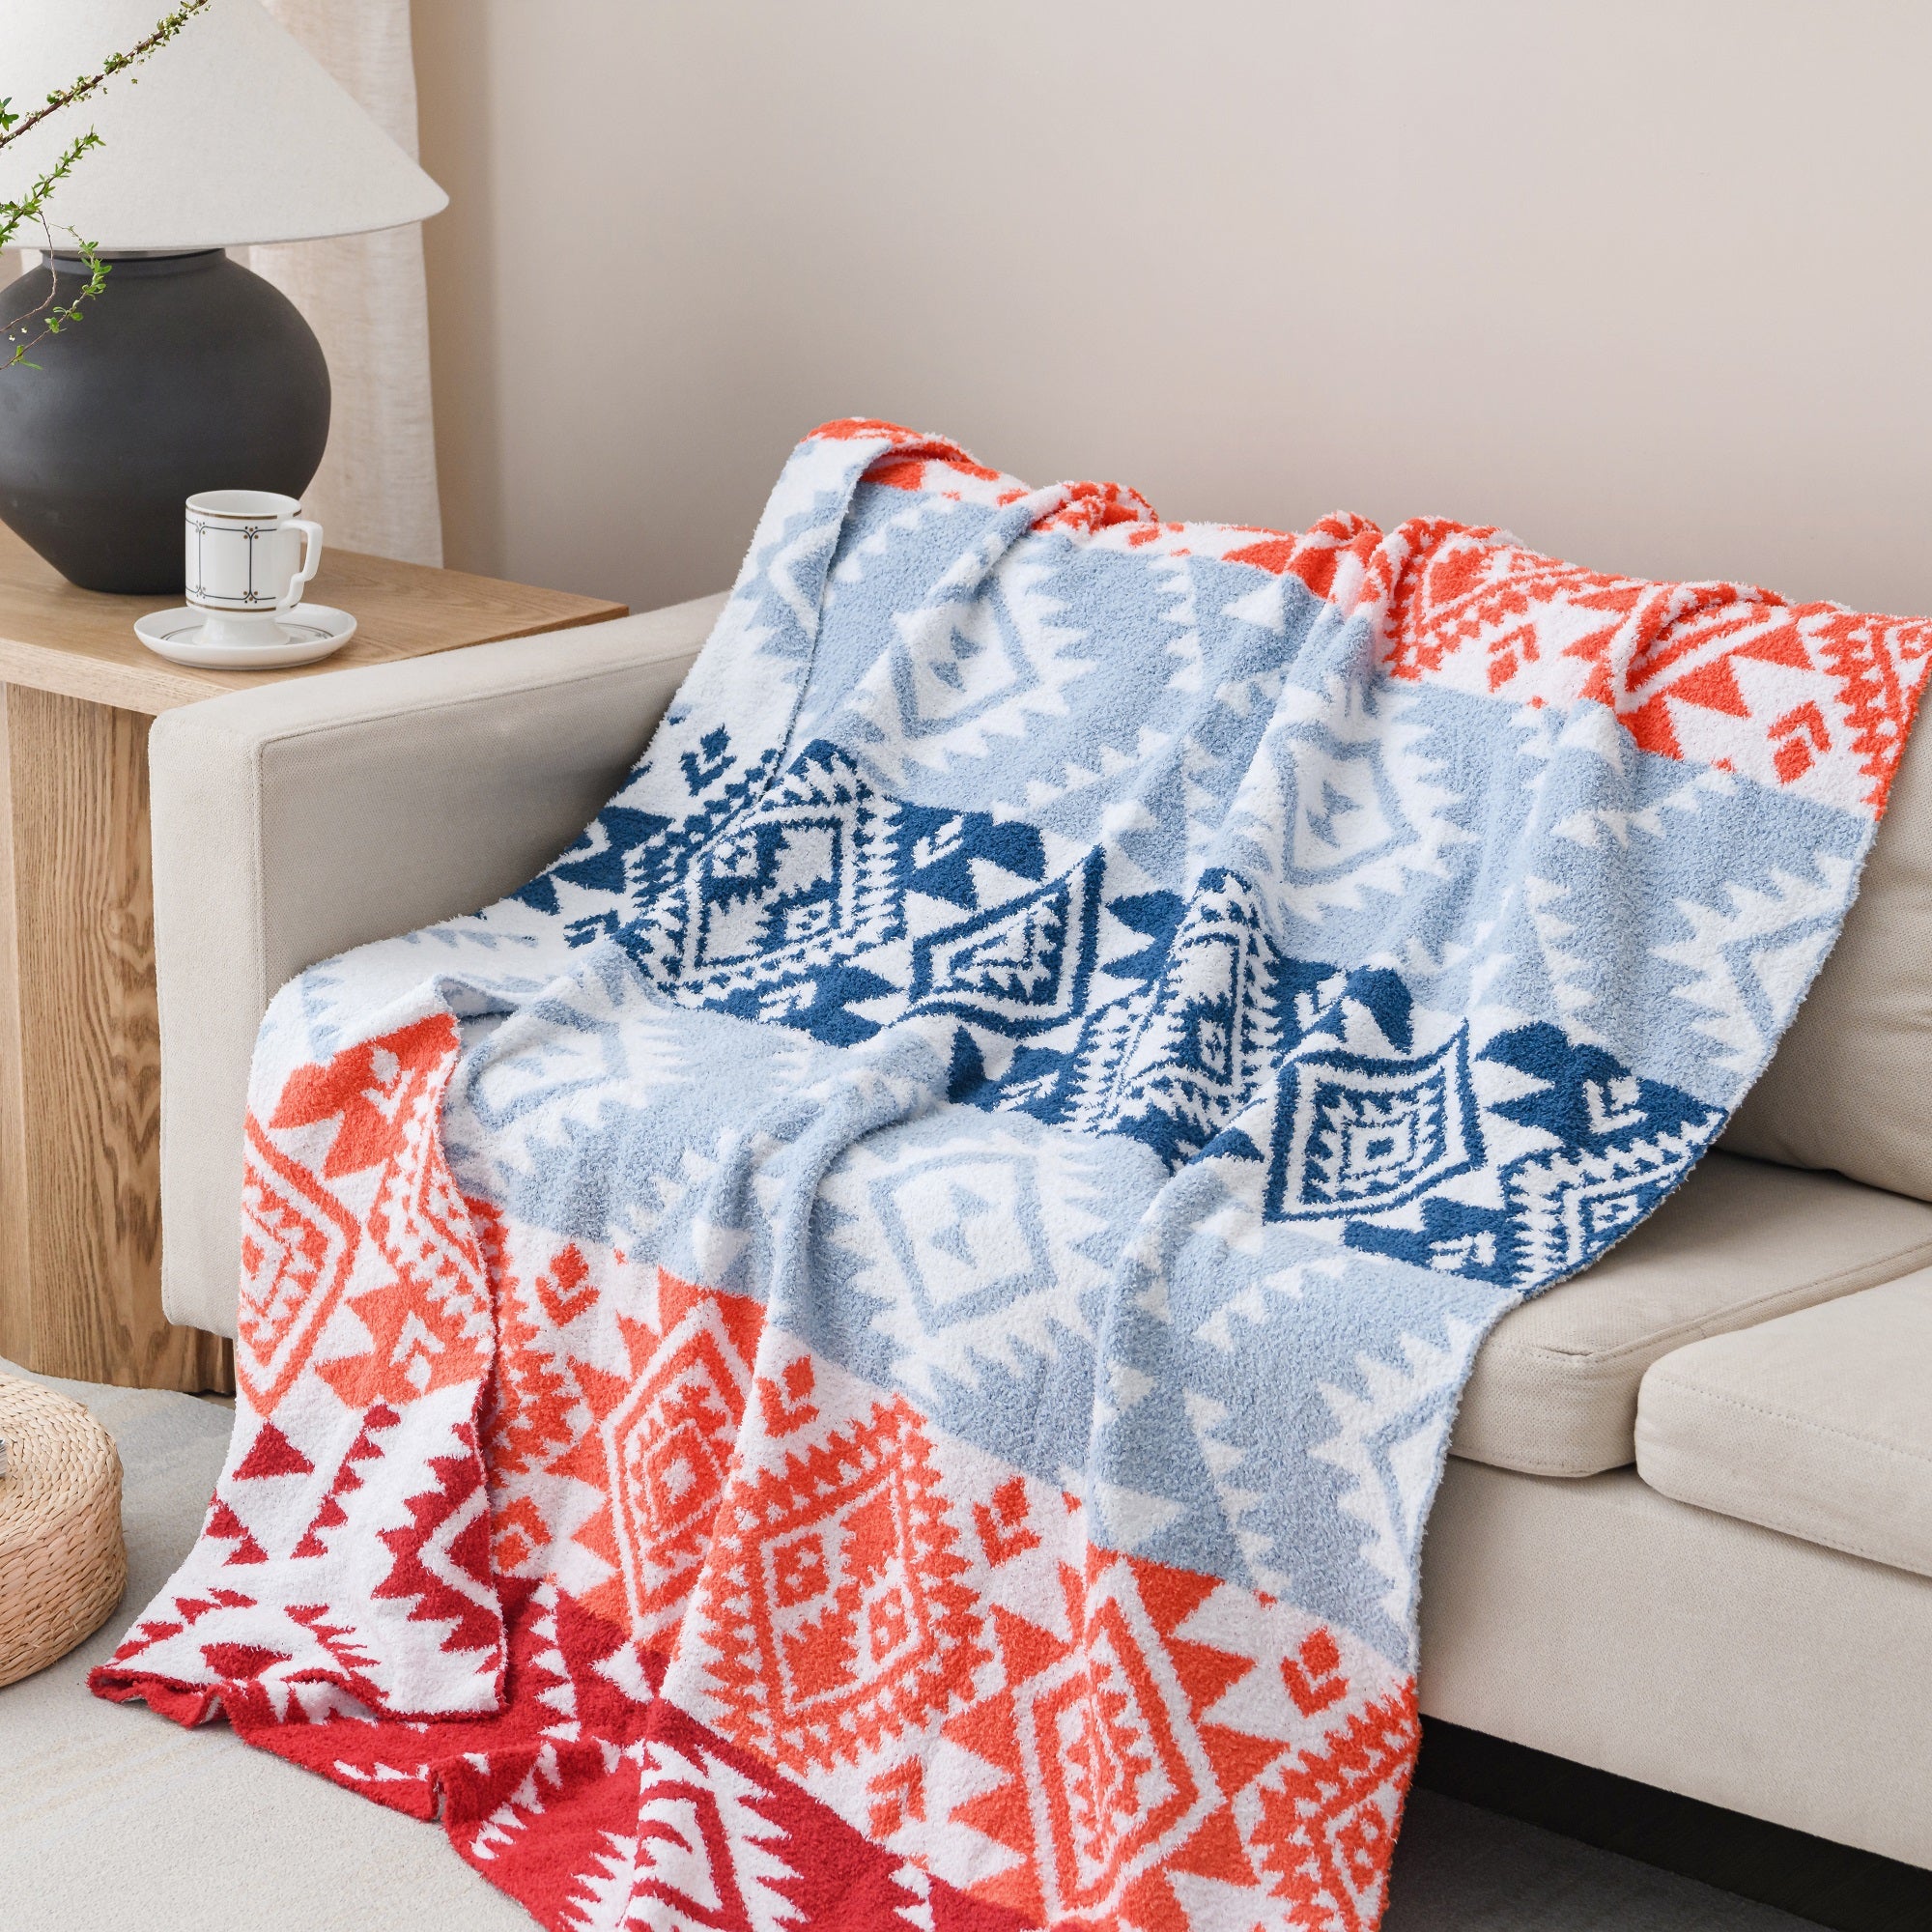 Jacquard Knit Throw Throw Blanket 50 x 60 inches Red Aztec